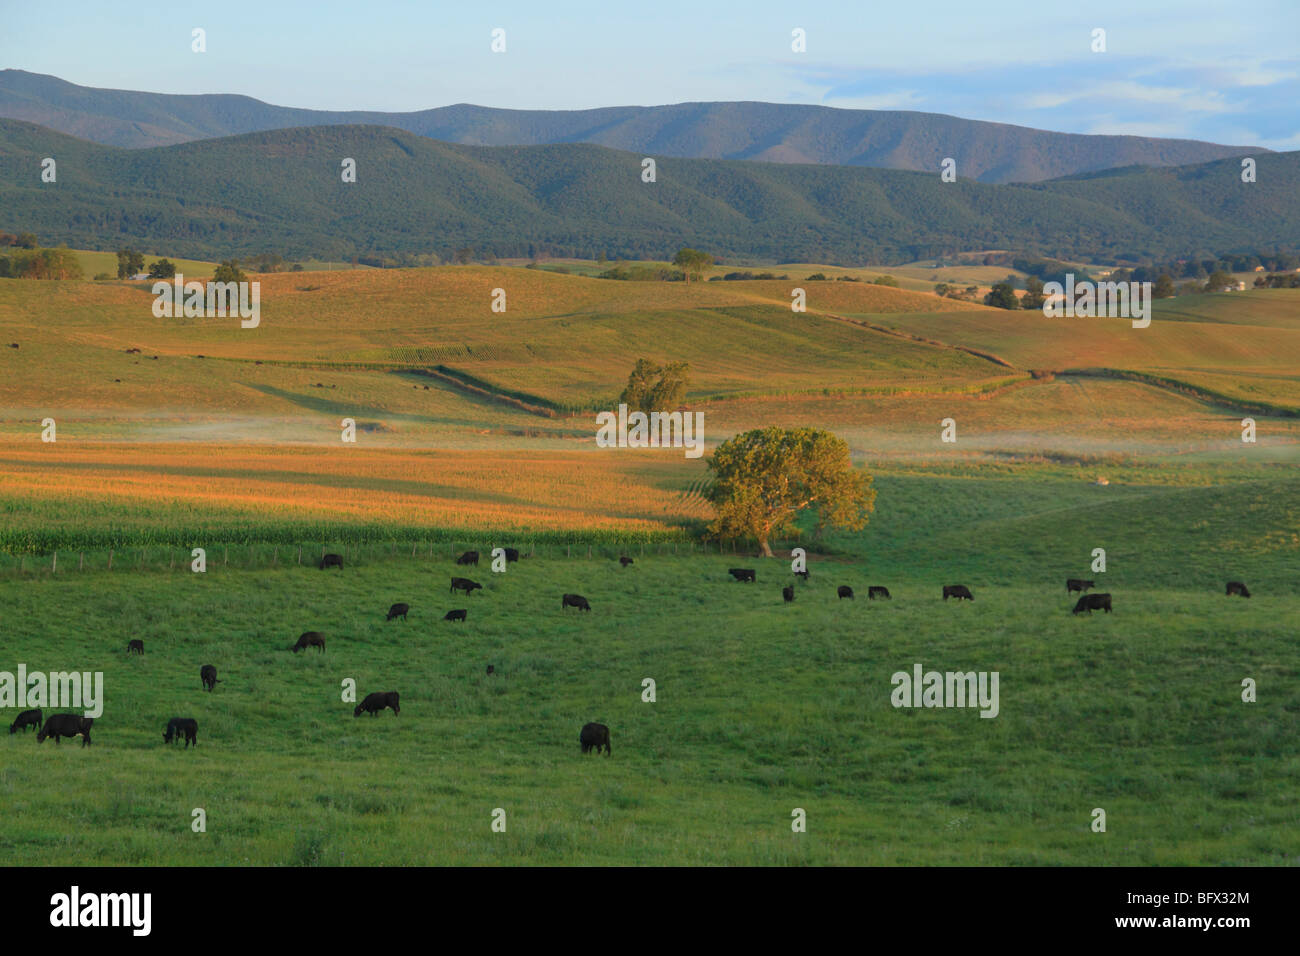 Cattle graze on farmland in Swoope, Shenandoah Valley, Virginia Stock Photo